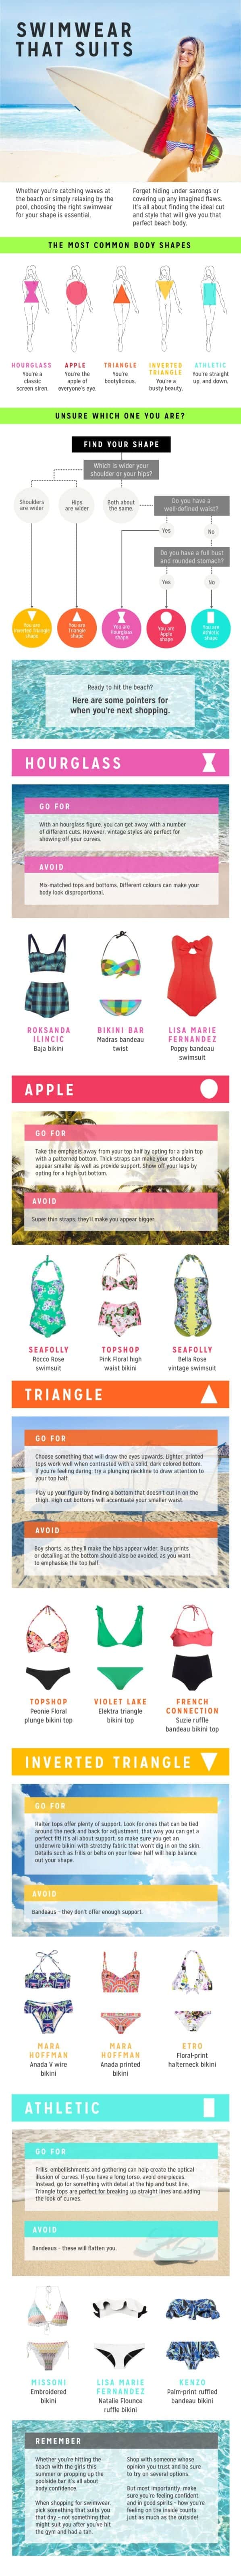 The Best Bathing Suits For All Body Types [Infographic]